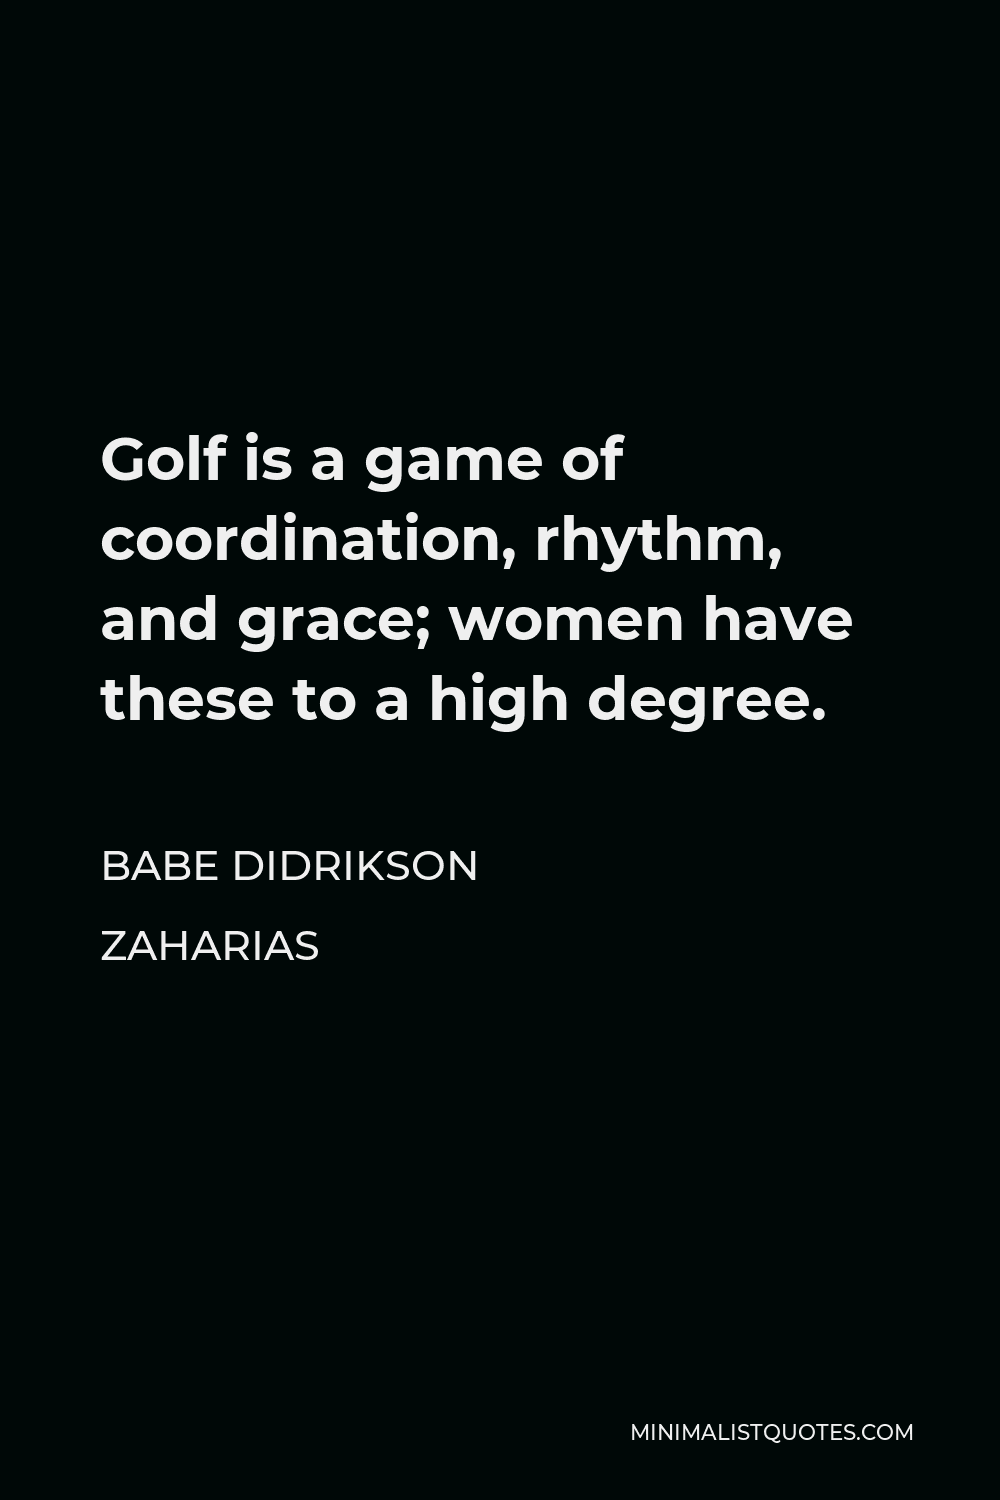 Babe Didrikson Zaharias Quote - Golf is a game of coordination, rhythm, and grace; women have these to a high degree.